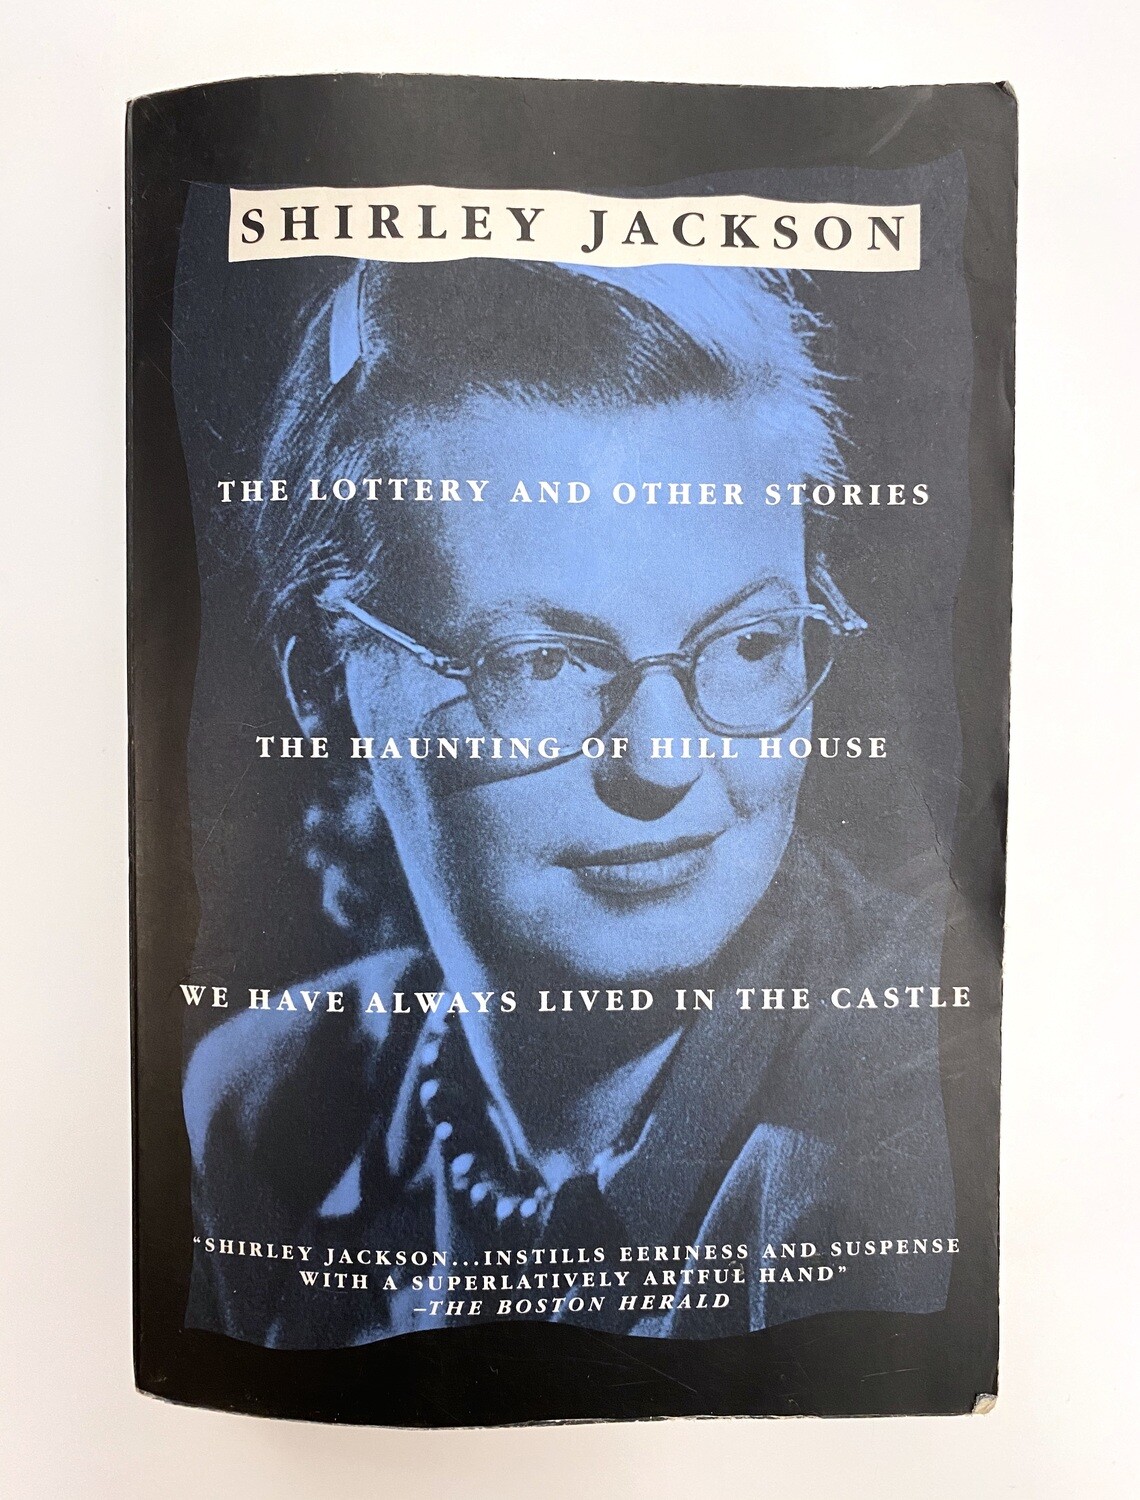 USED - Lottery &amp; Other Stories; Haunting of Hill House; Always Lived in the Castle, Shirley Jackson